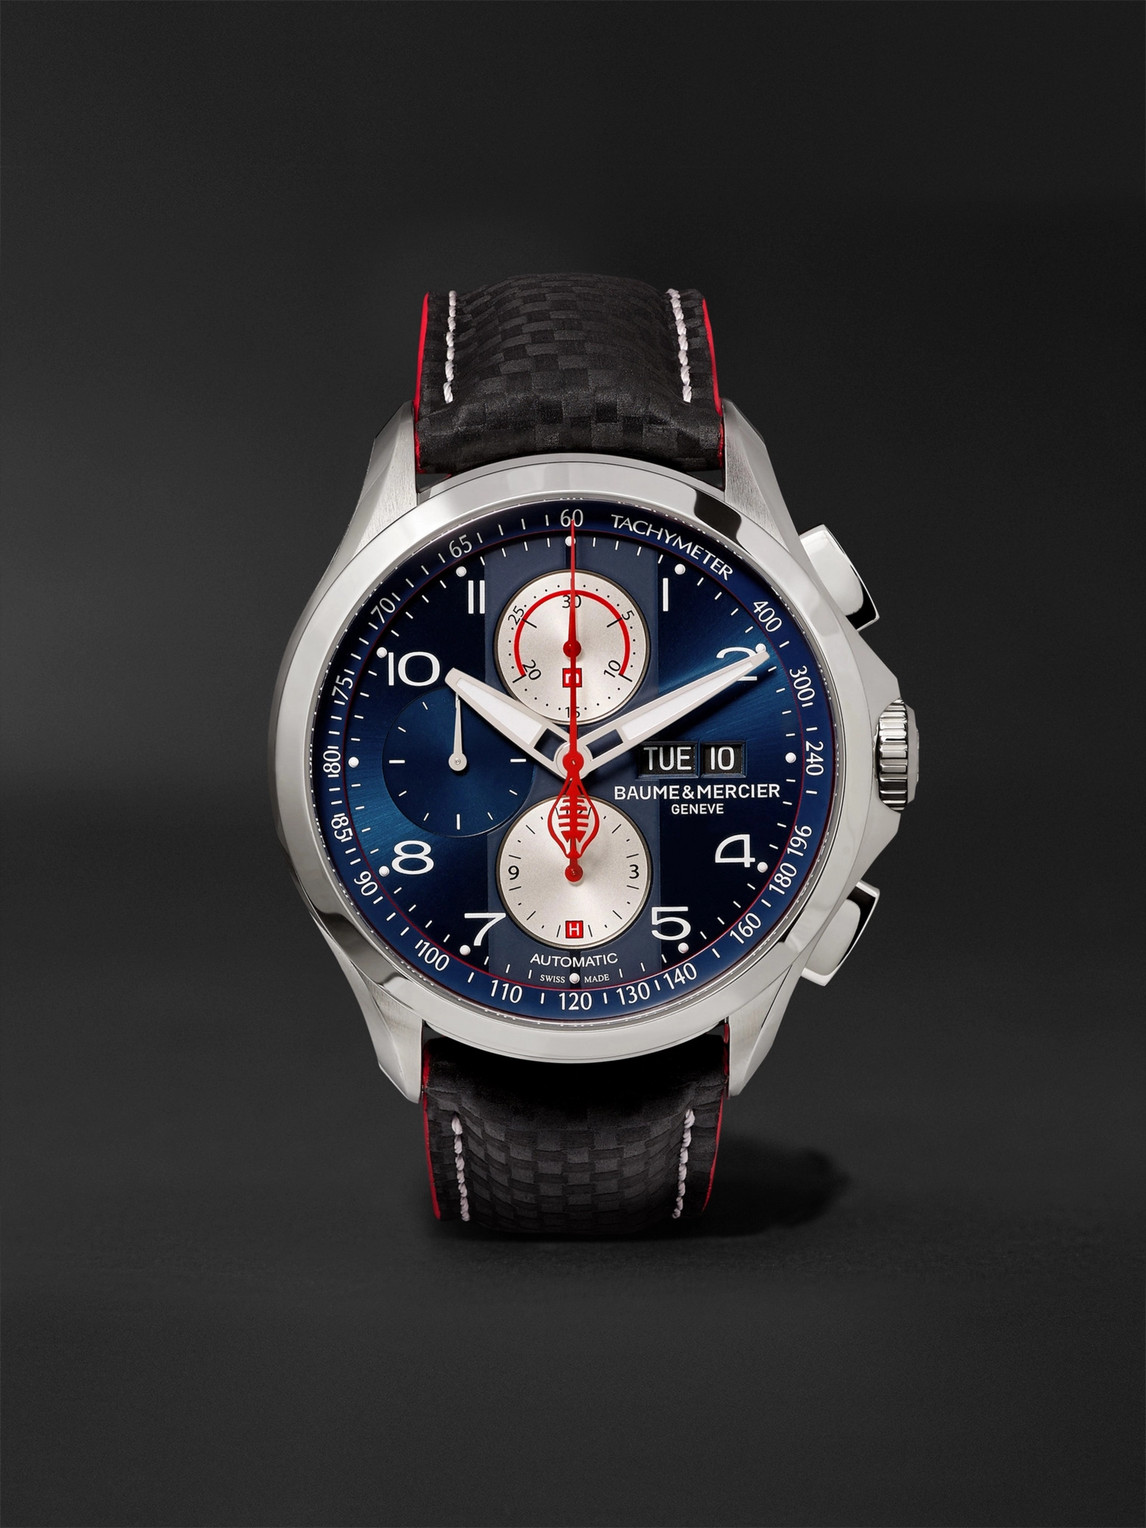 Baume & Mercier Clifton Club Shelby Cobra Automatic Chronograph 44mm Stainless Steel And Leather Watch, Ref. No. 103 In Blue